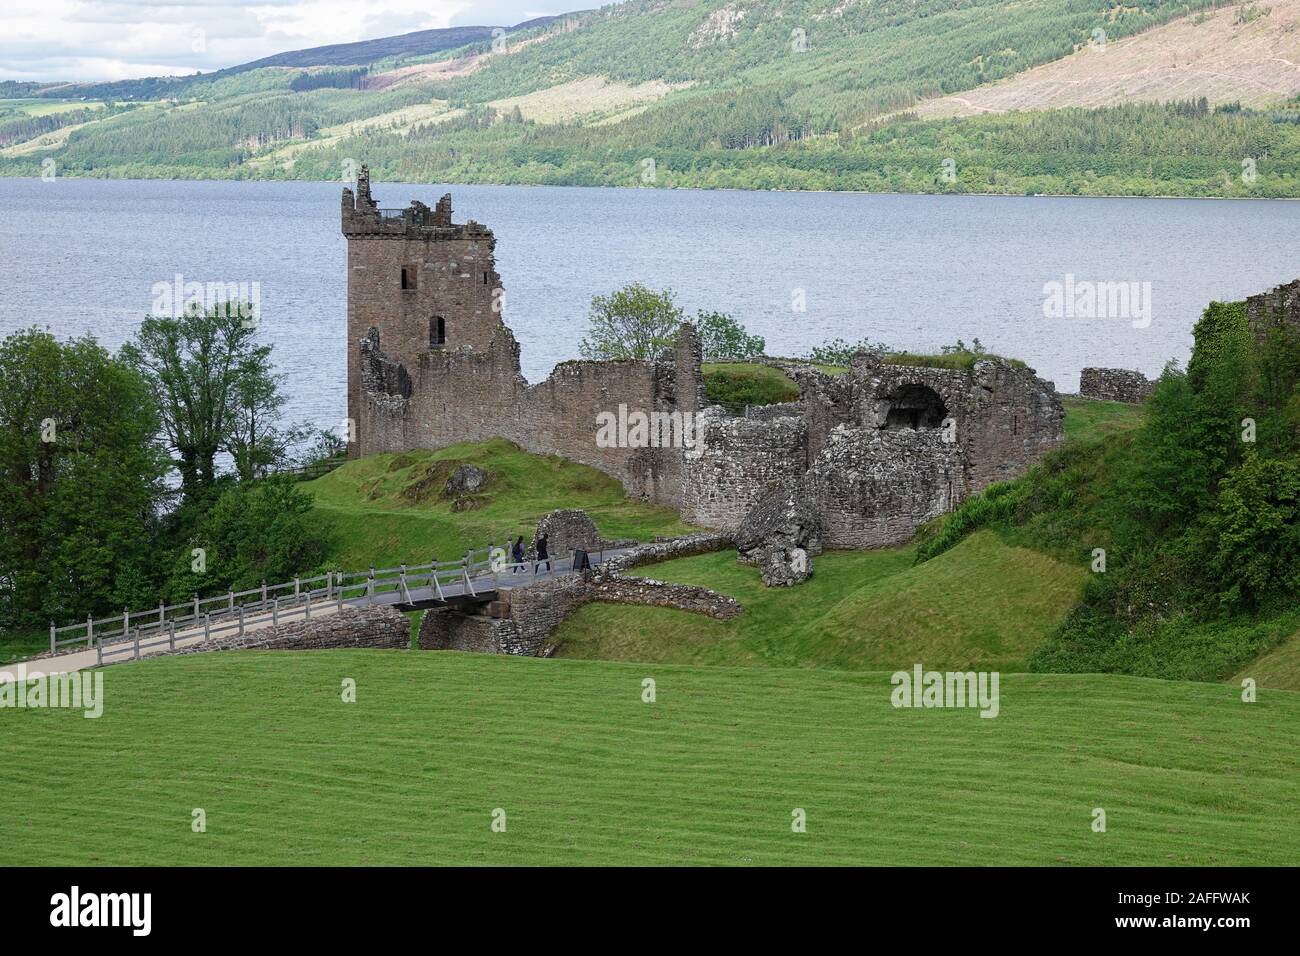 Drumnadrochit, Inverness, Scotland - June 10, 2019: Located next to the legendary lake, Loch Ness, Urquhart Castle is shown during the day. Stock Photo